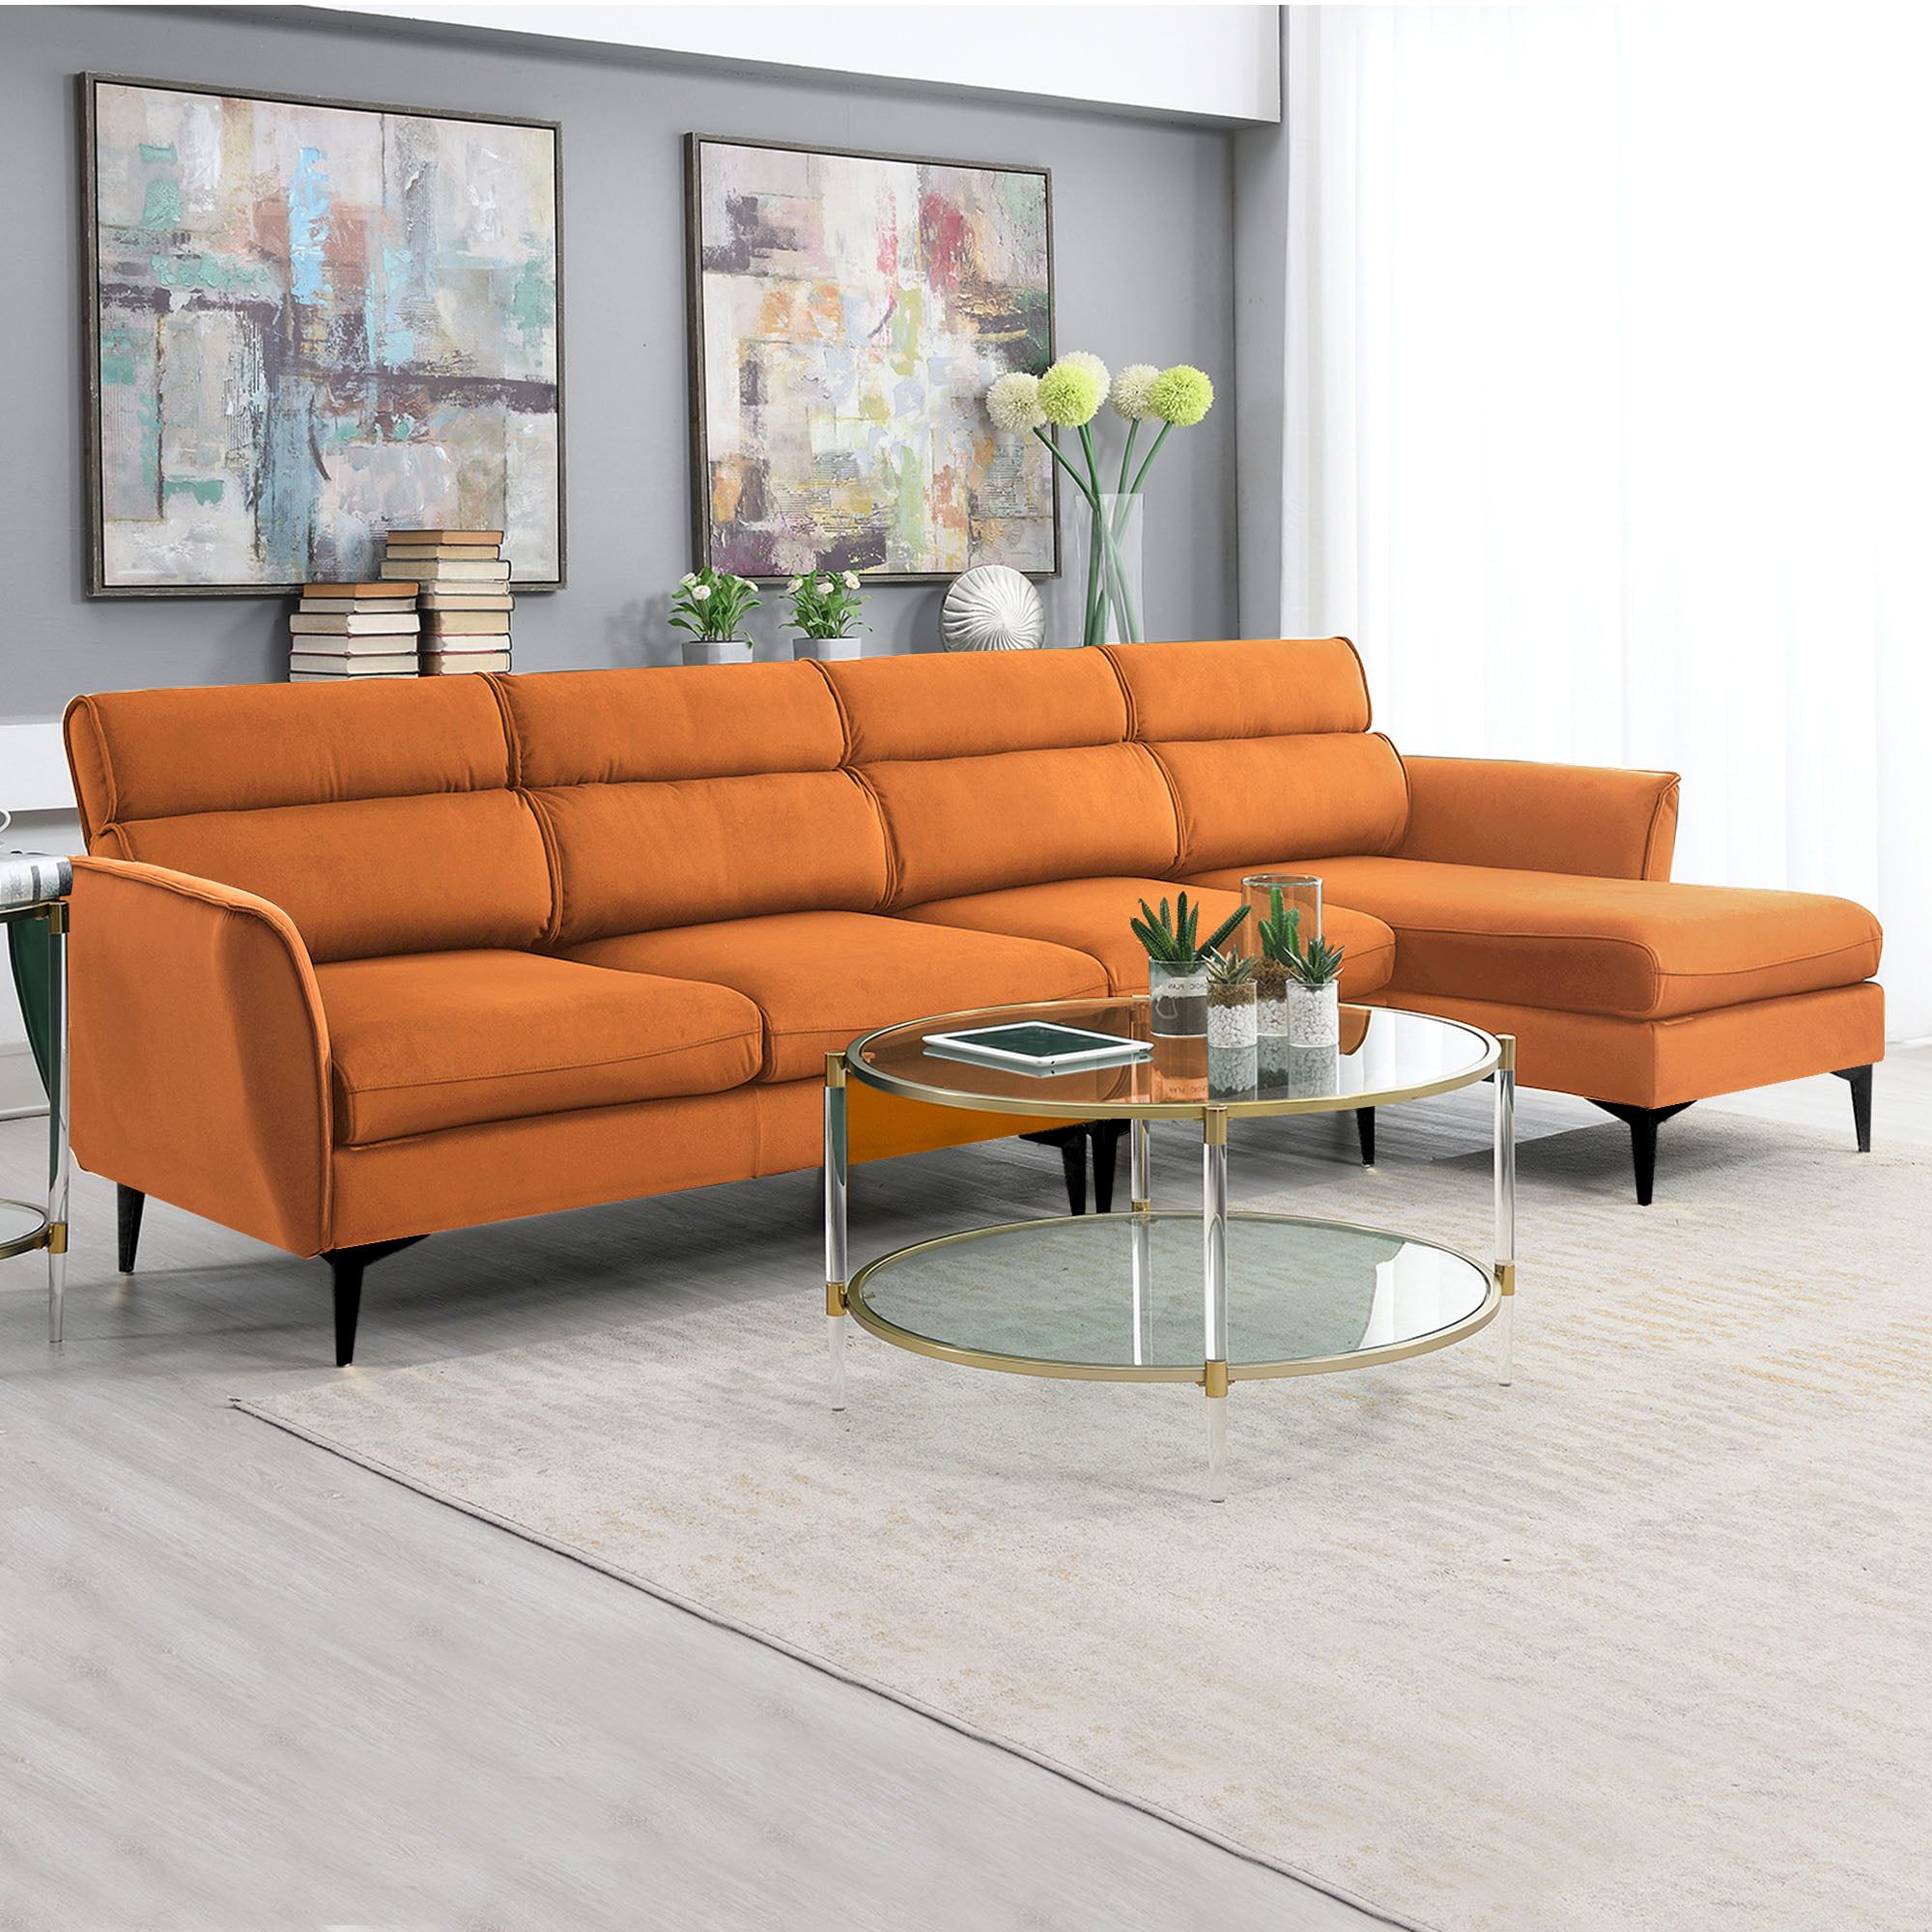 111"l Convertible Sectional Sofa Couch, Flannel L Shaped Couch With  Left/right Chaise, Modern Heavy Duty 4 Seater Sectional Couch, Kamida Sectional  Couch Furniture For Living Room, Orange – Walmart With Regard To Heavy Duty Sectional Couches (Gallery 4 of 20)